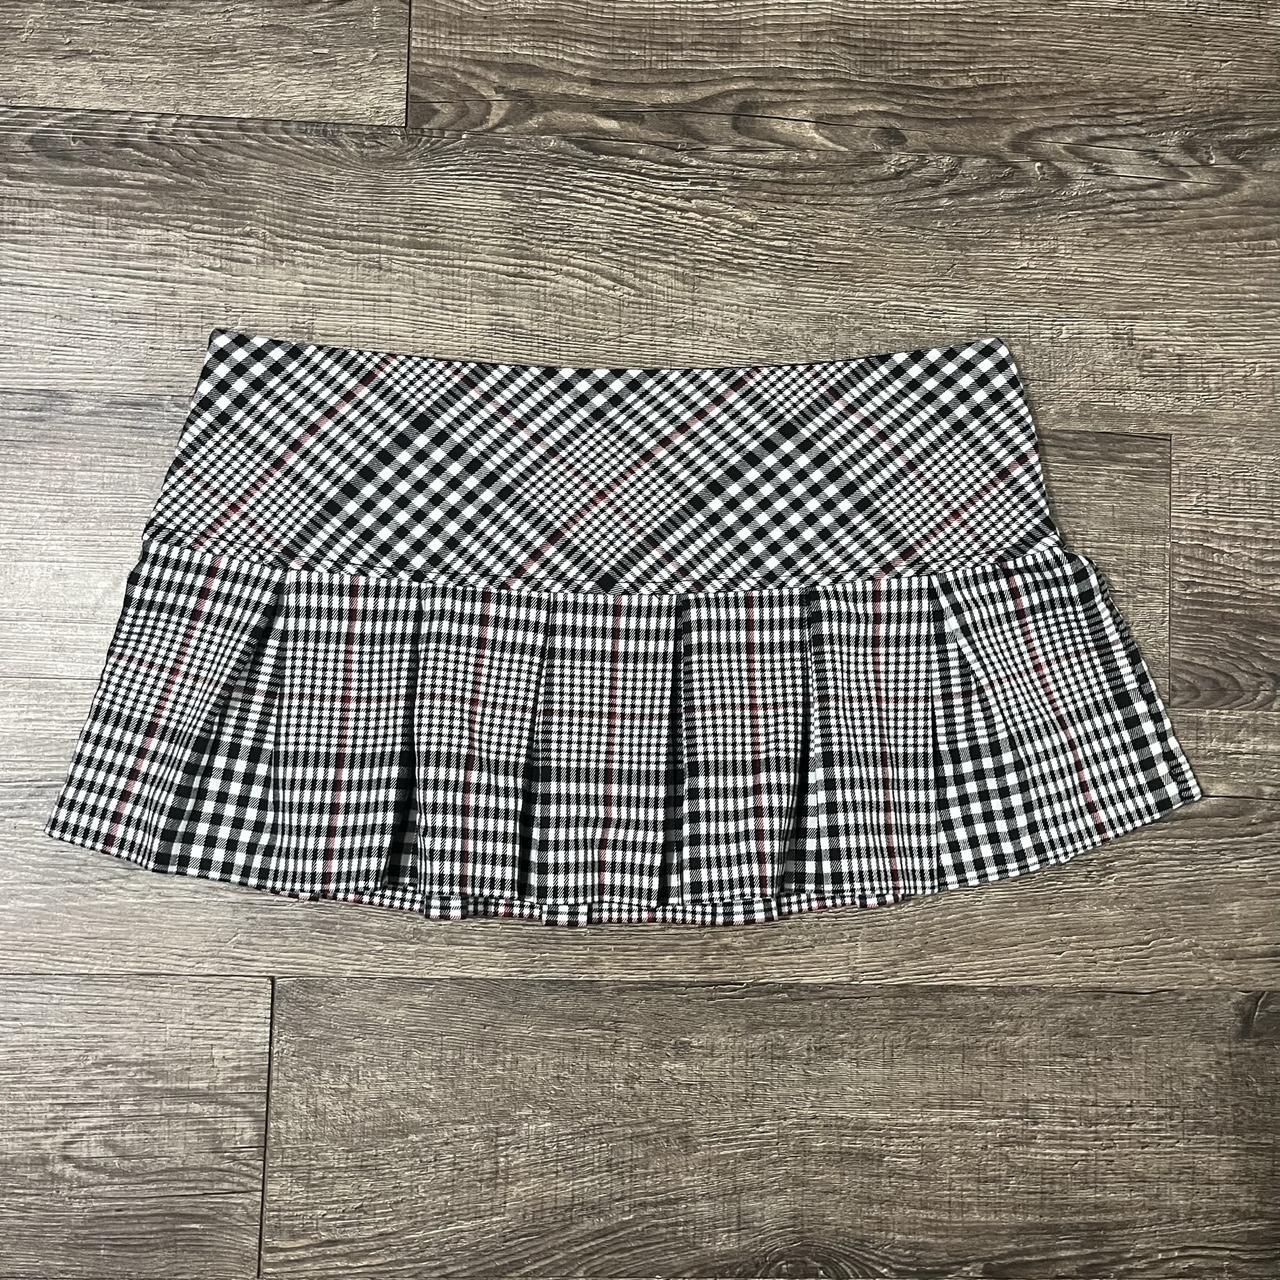 plaid mini skirt no size tag but best for a size... - Depop